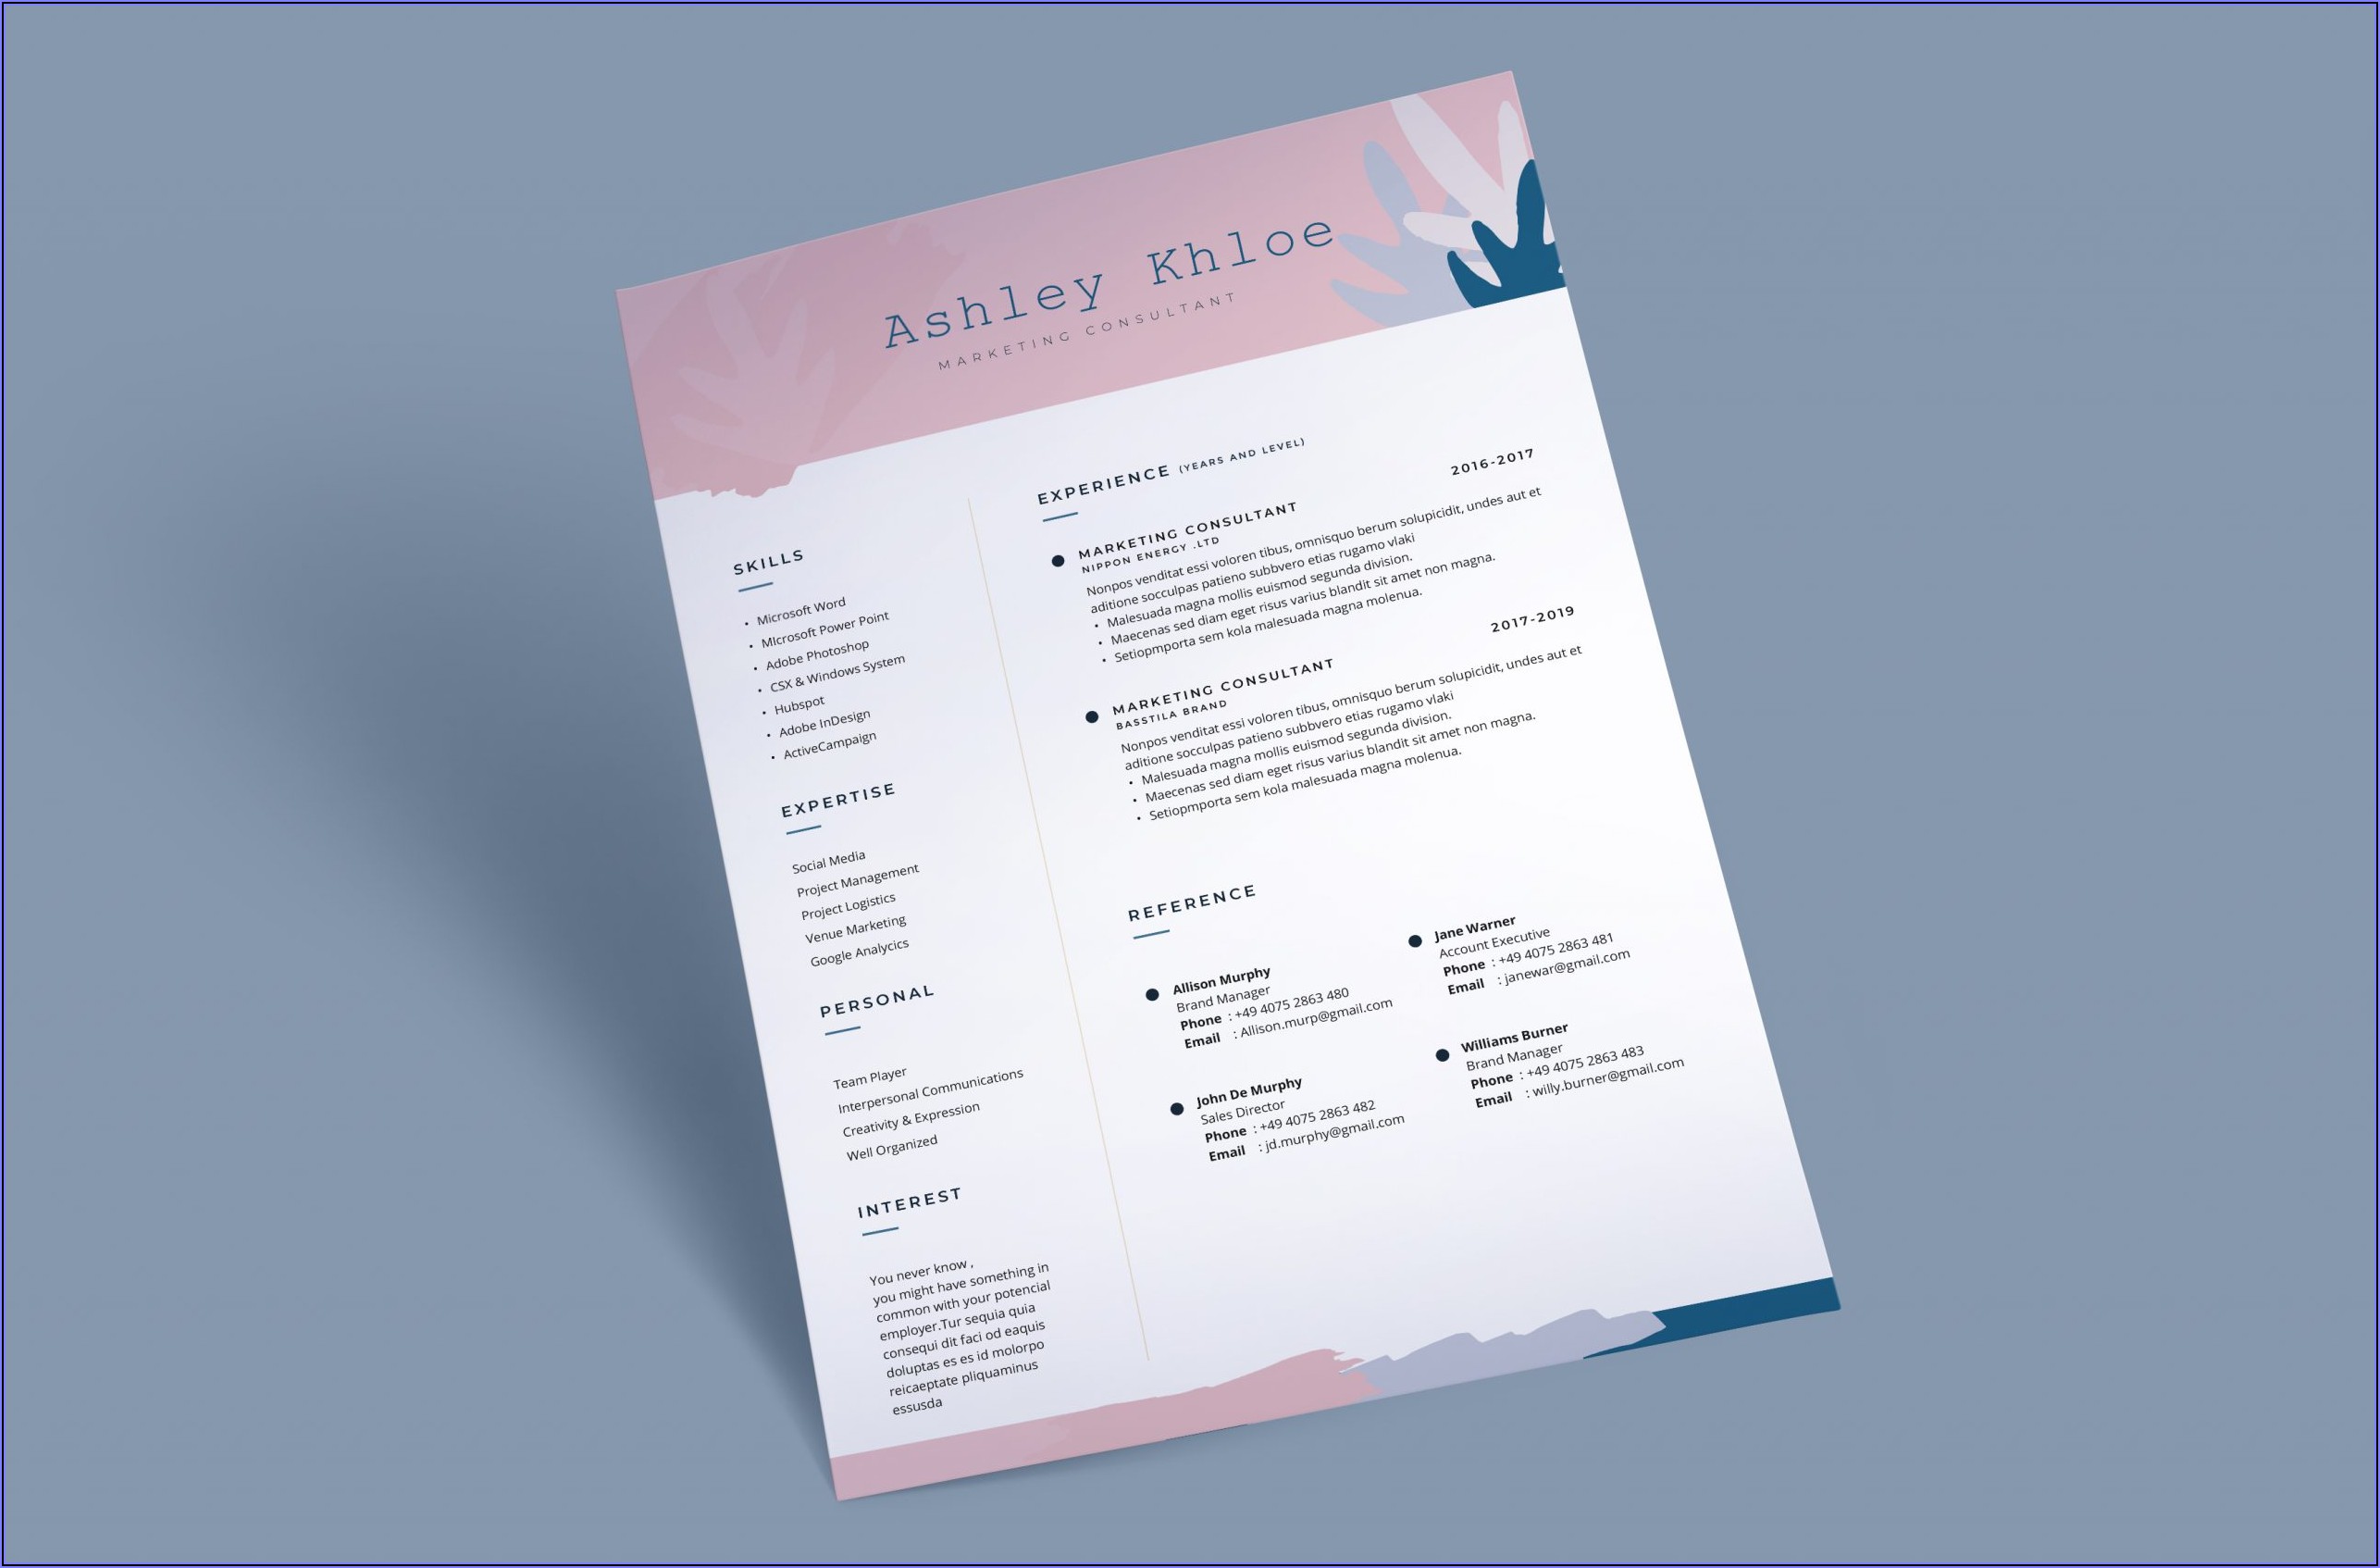 Ats Friendly Resume Template Download